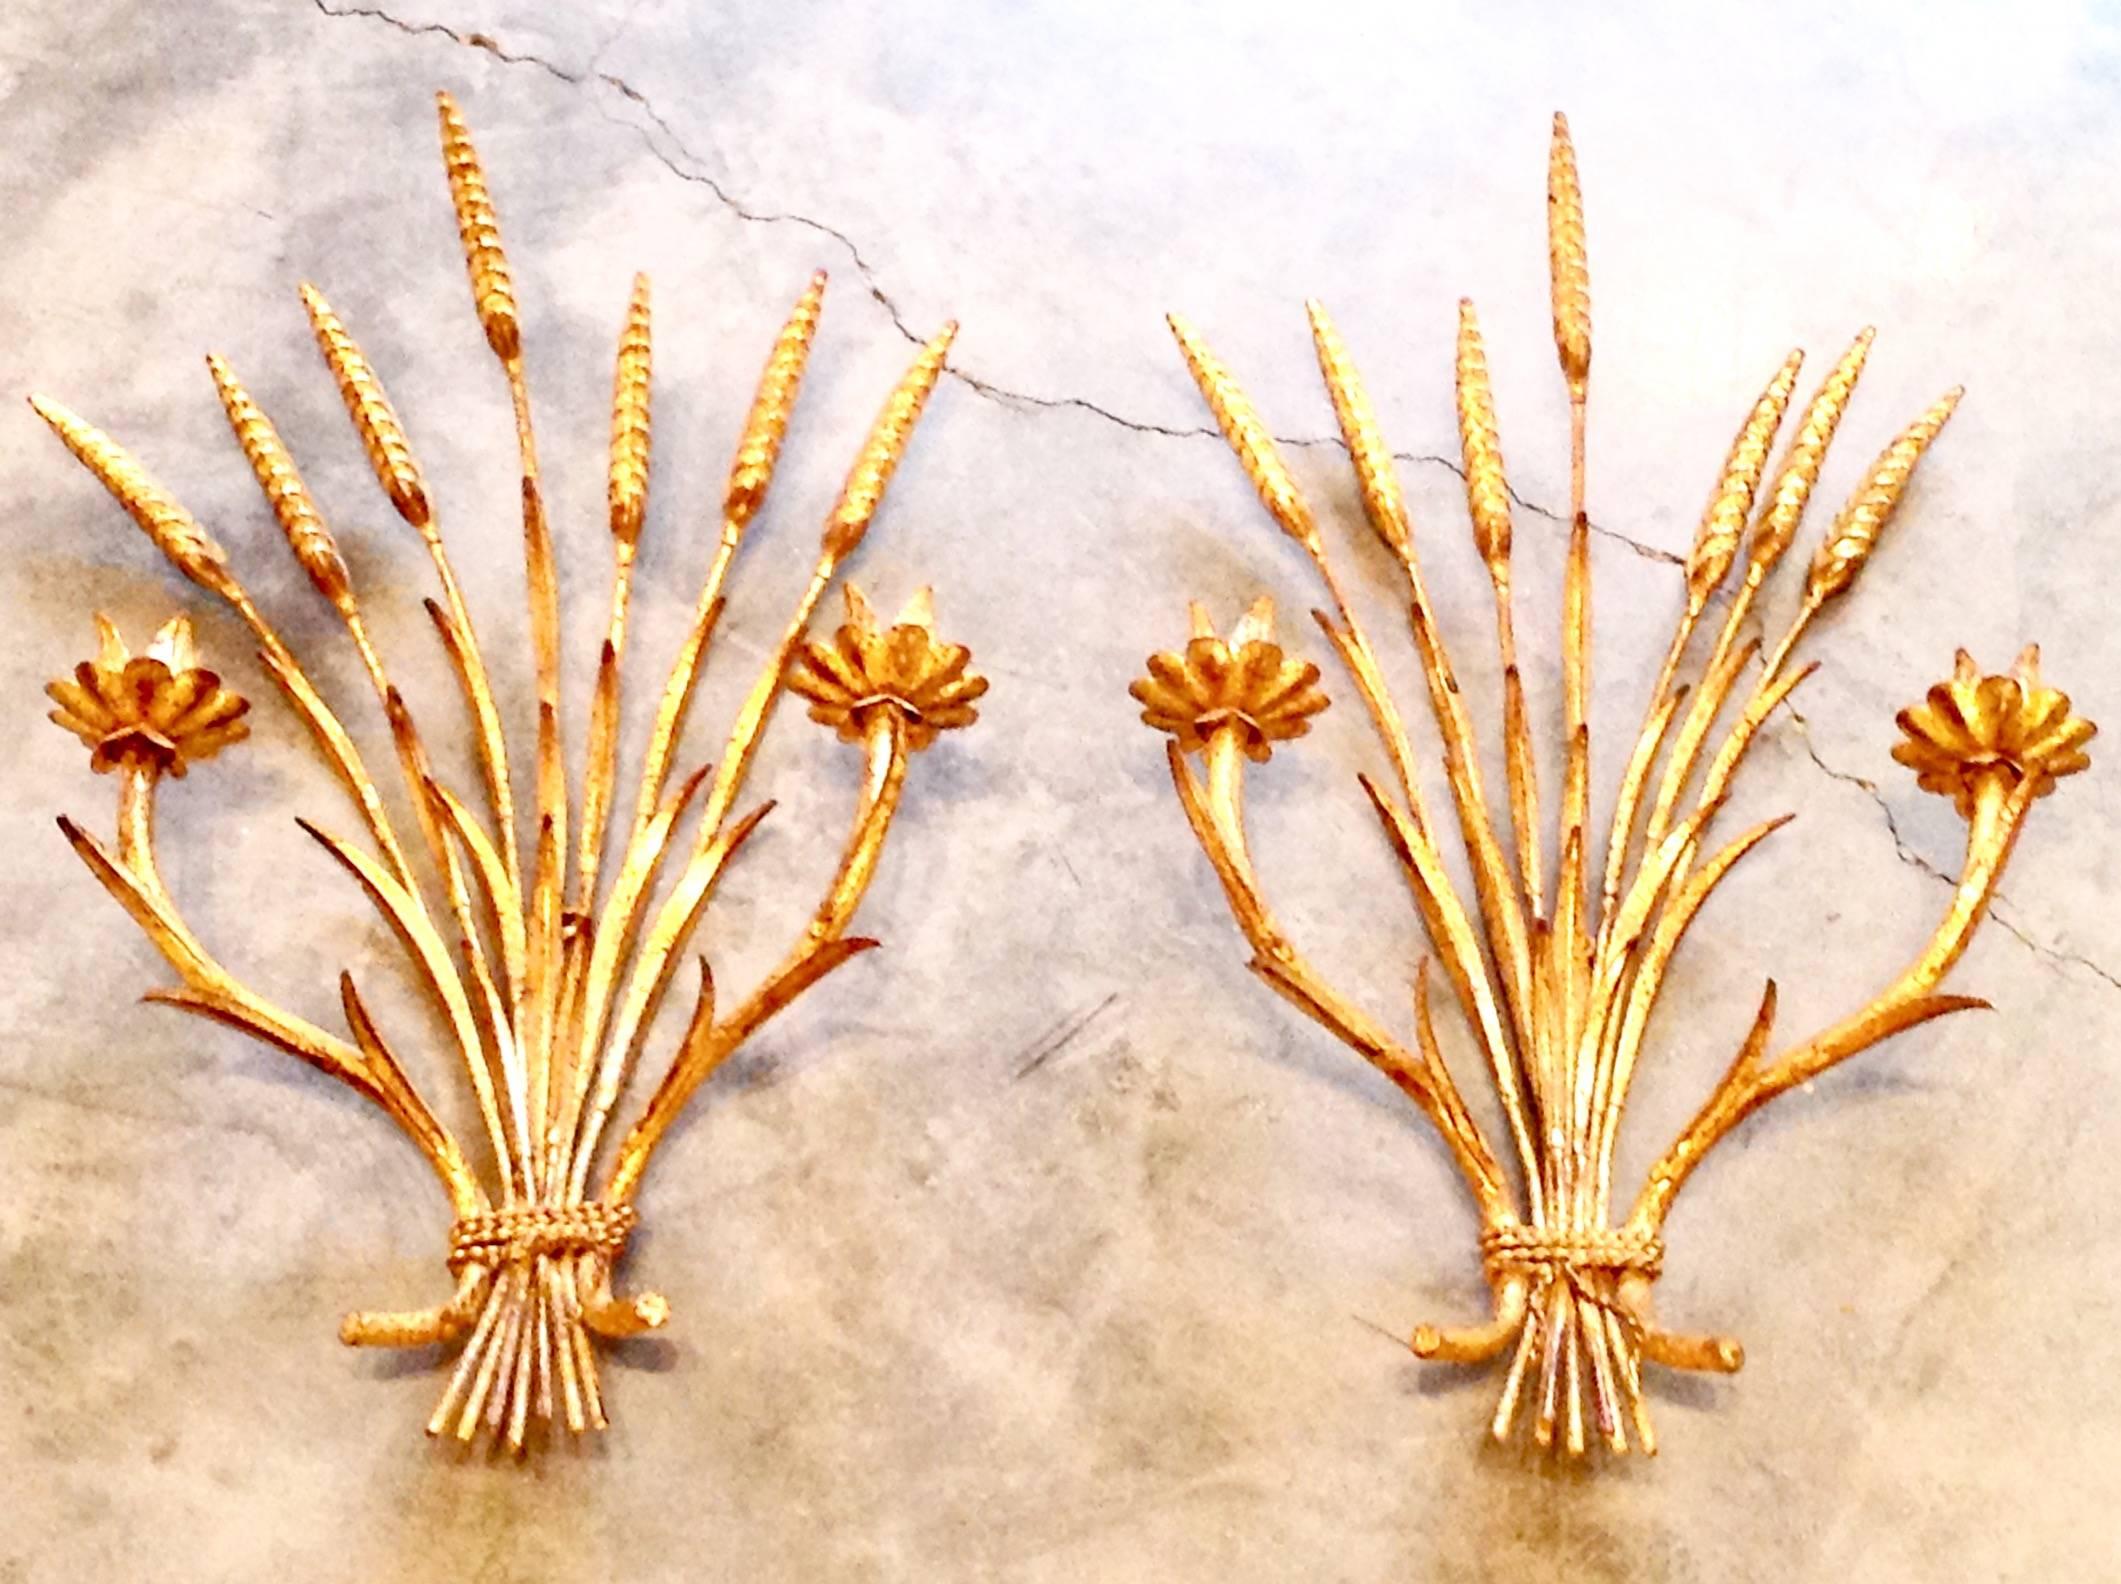 Pair of vintage Italian tole wheat sconces, circa 1950s. Iron with gold finish. Measure 17 inches high and 11 inches wide.